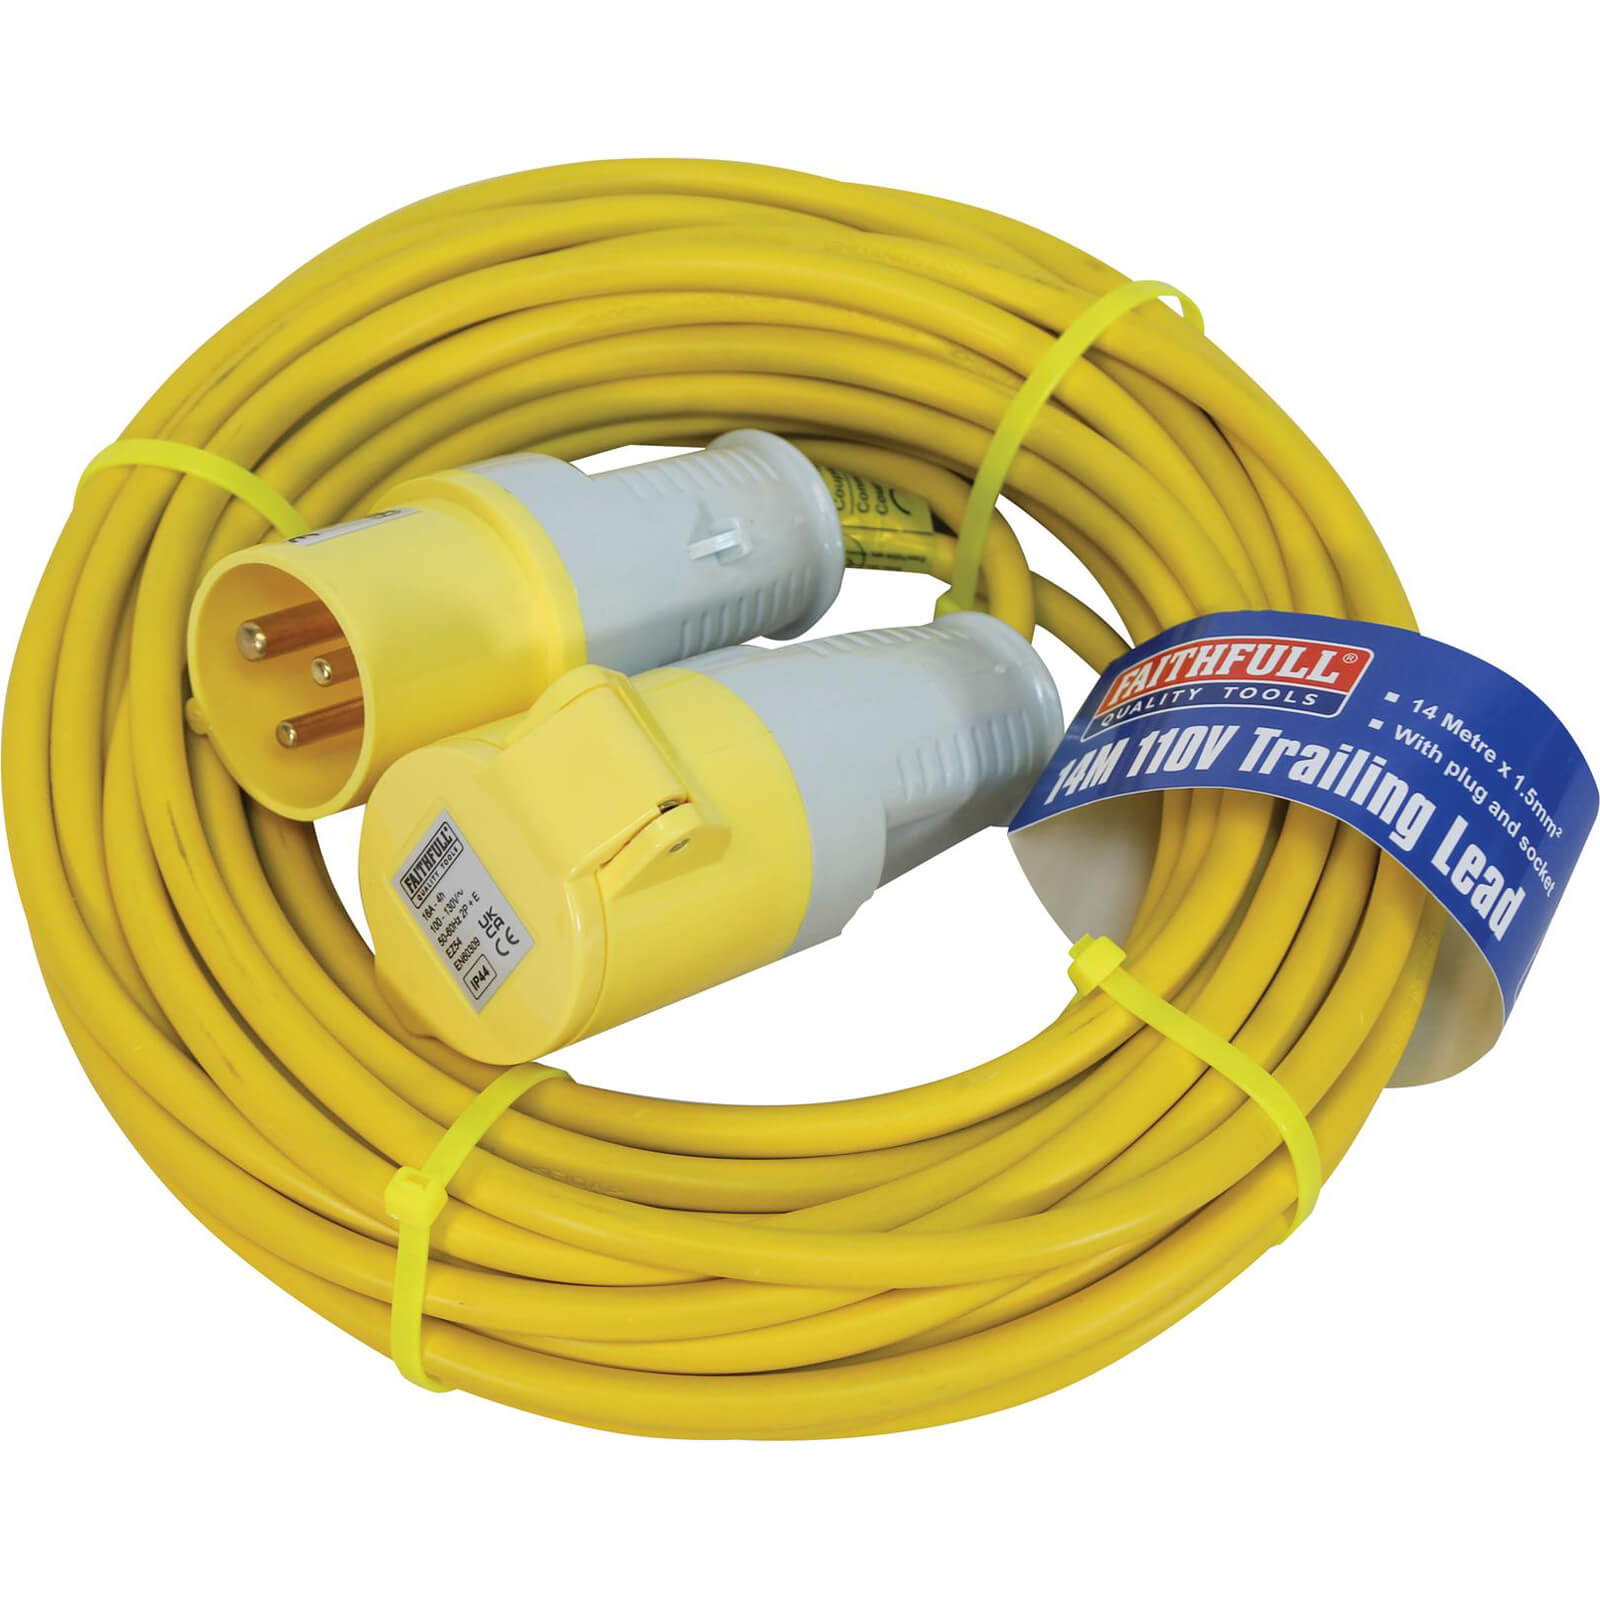 Photo of Faithfull Extension Trailing Lead 16 Amp Yellow Cable 110v 14m